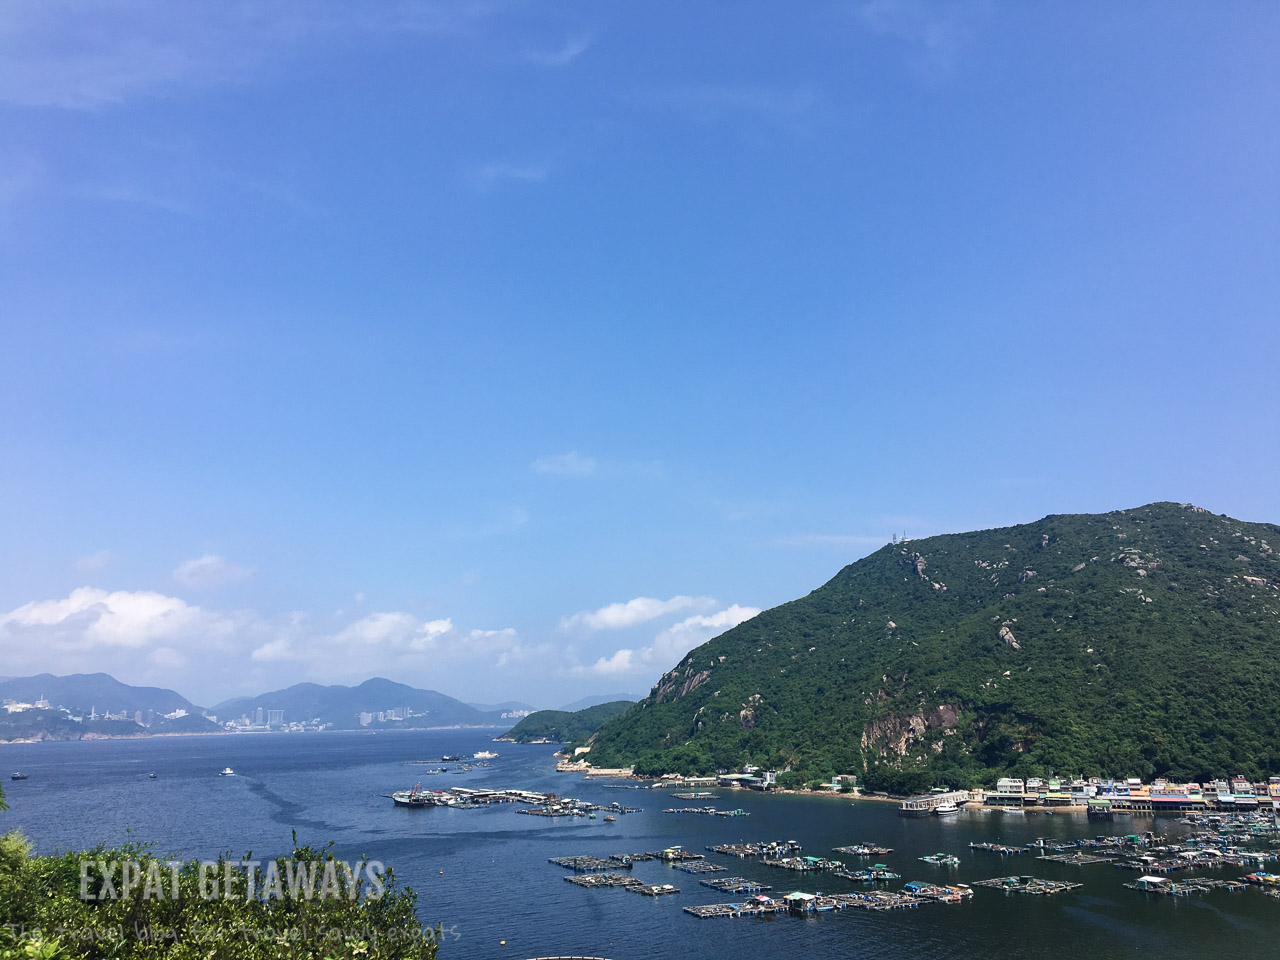 A hike on the Family Trail, Lamma Island rewards you with spectacular scenery.